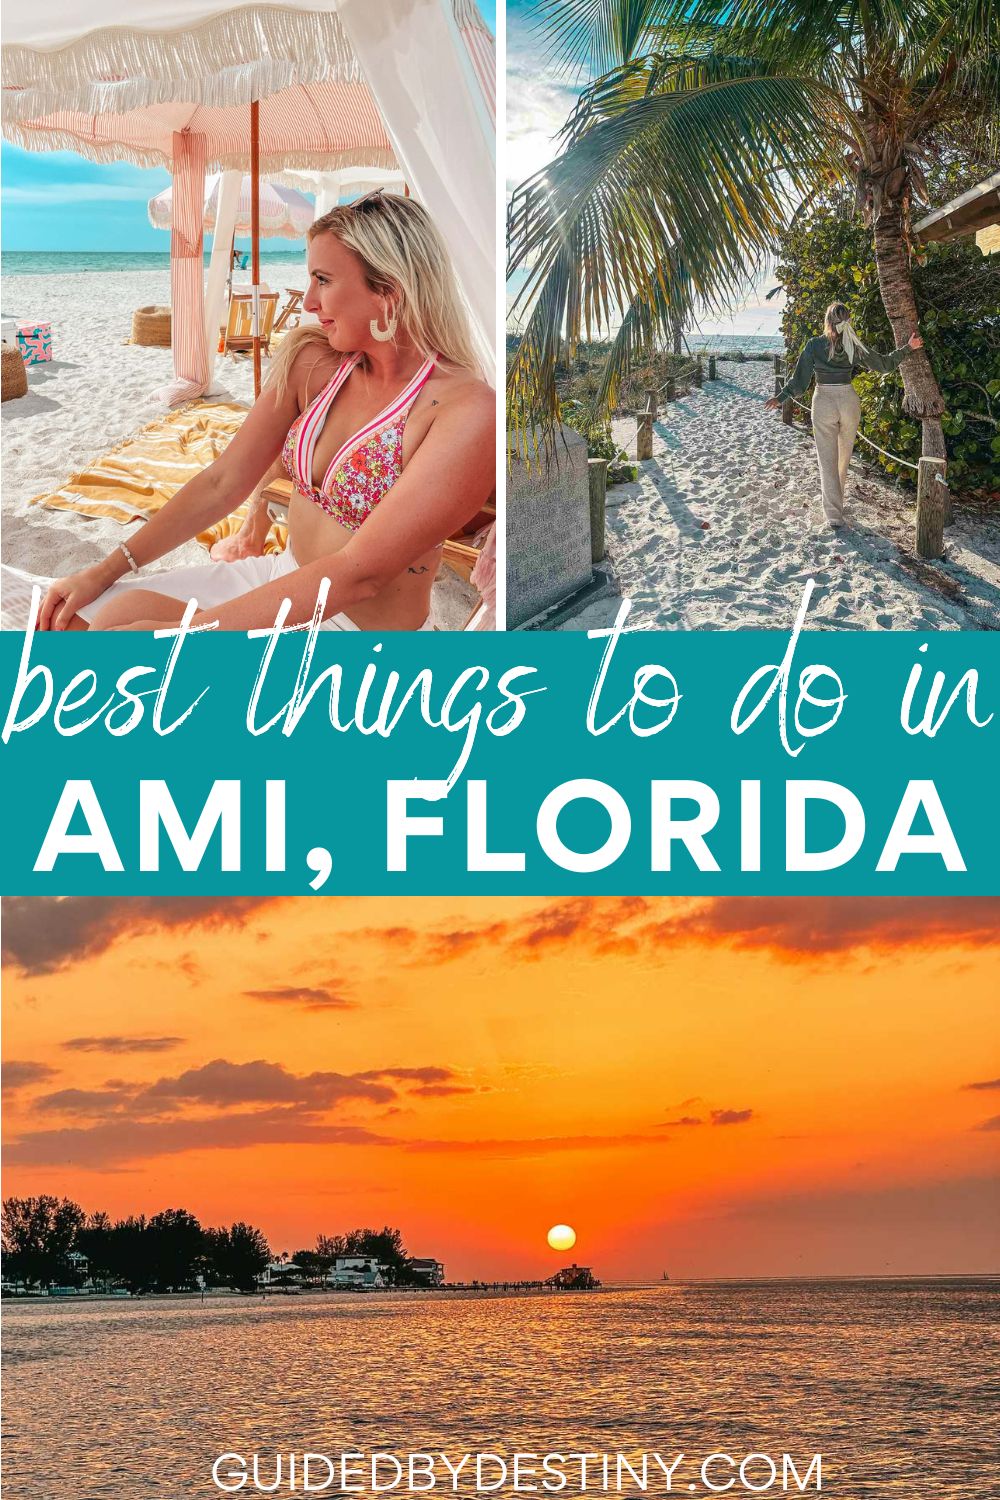 best things to do in AMI fl